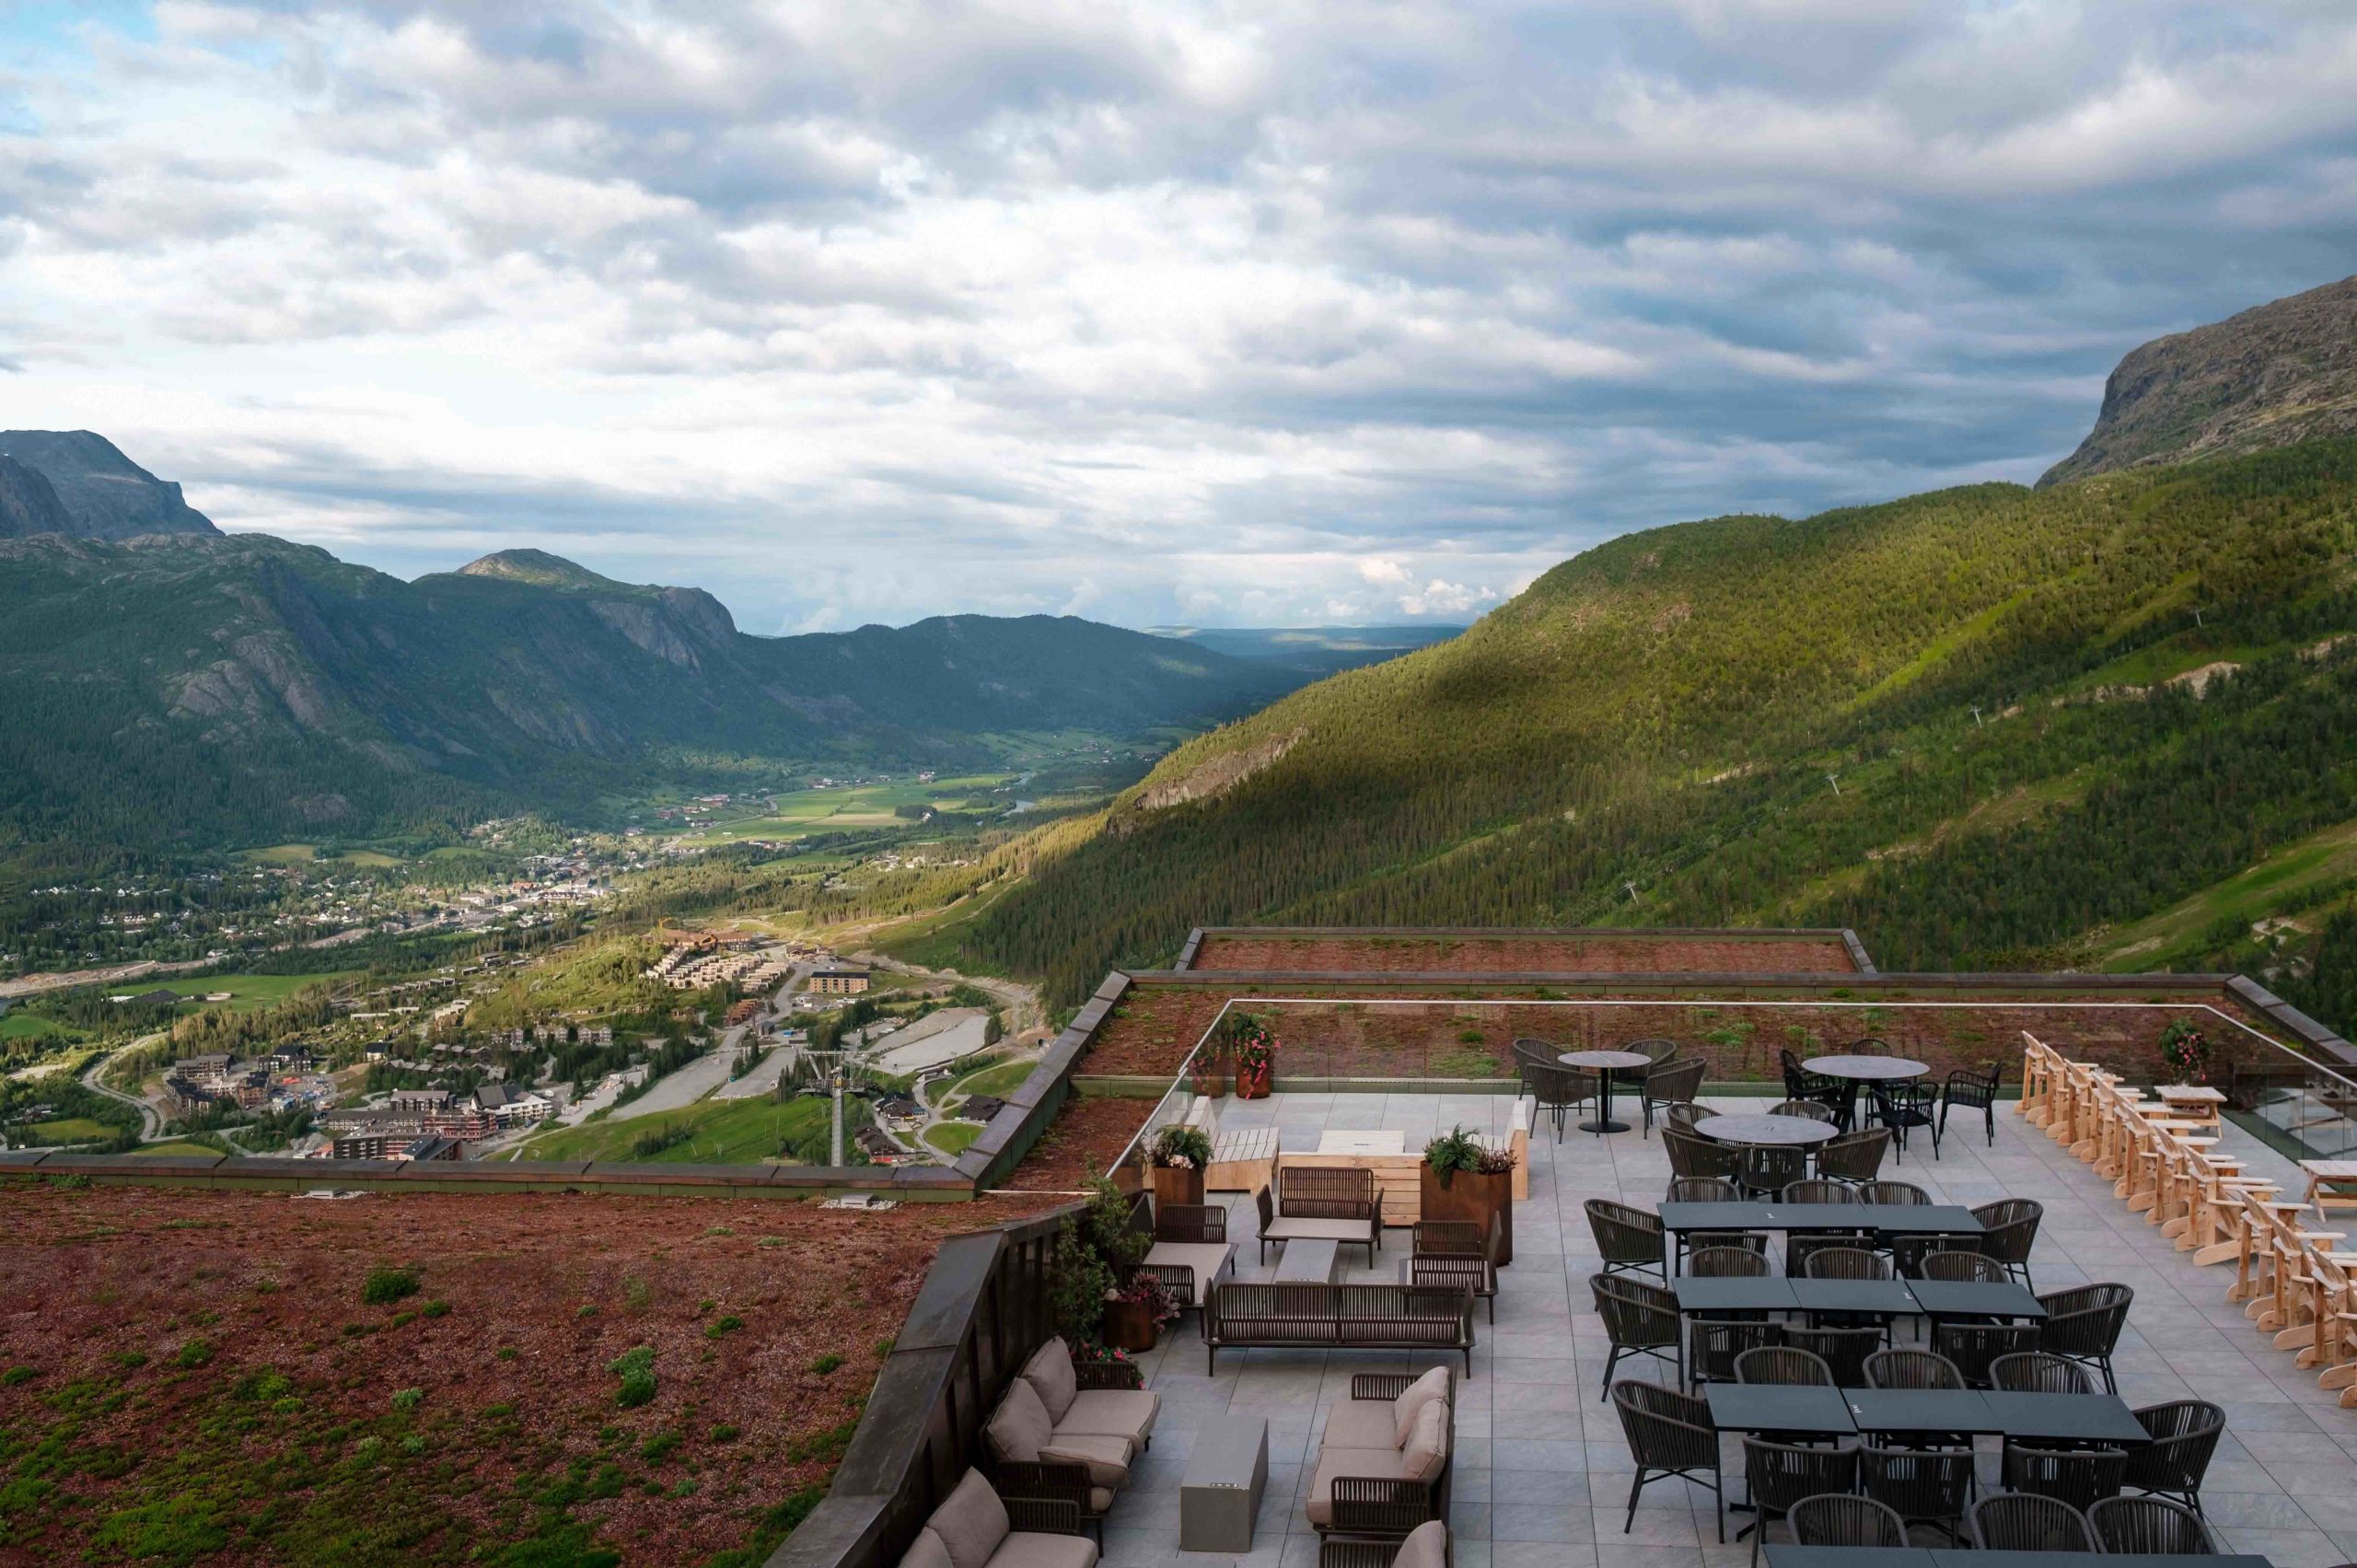 The hotel's terrace with a view to Hemsedal